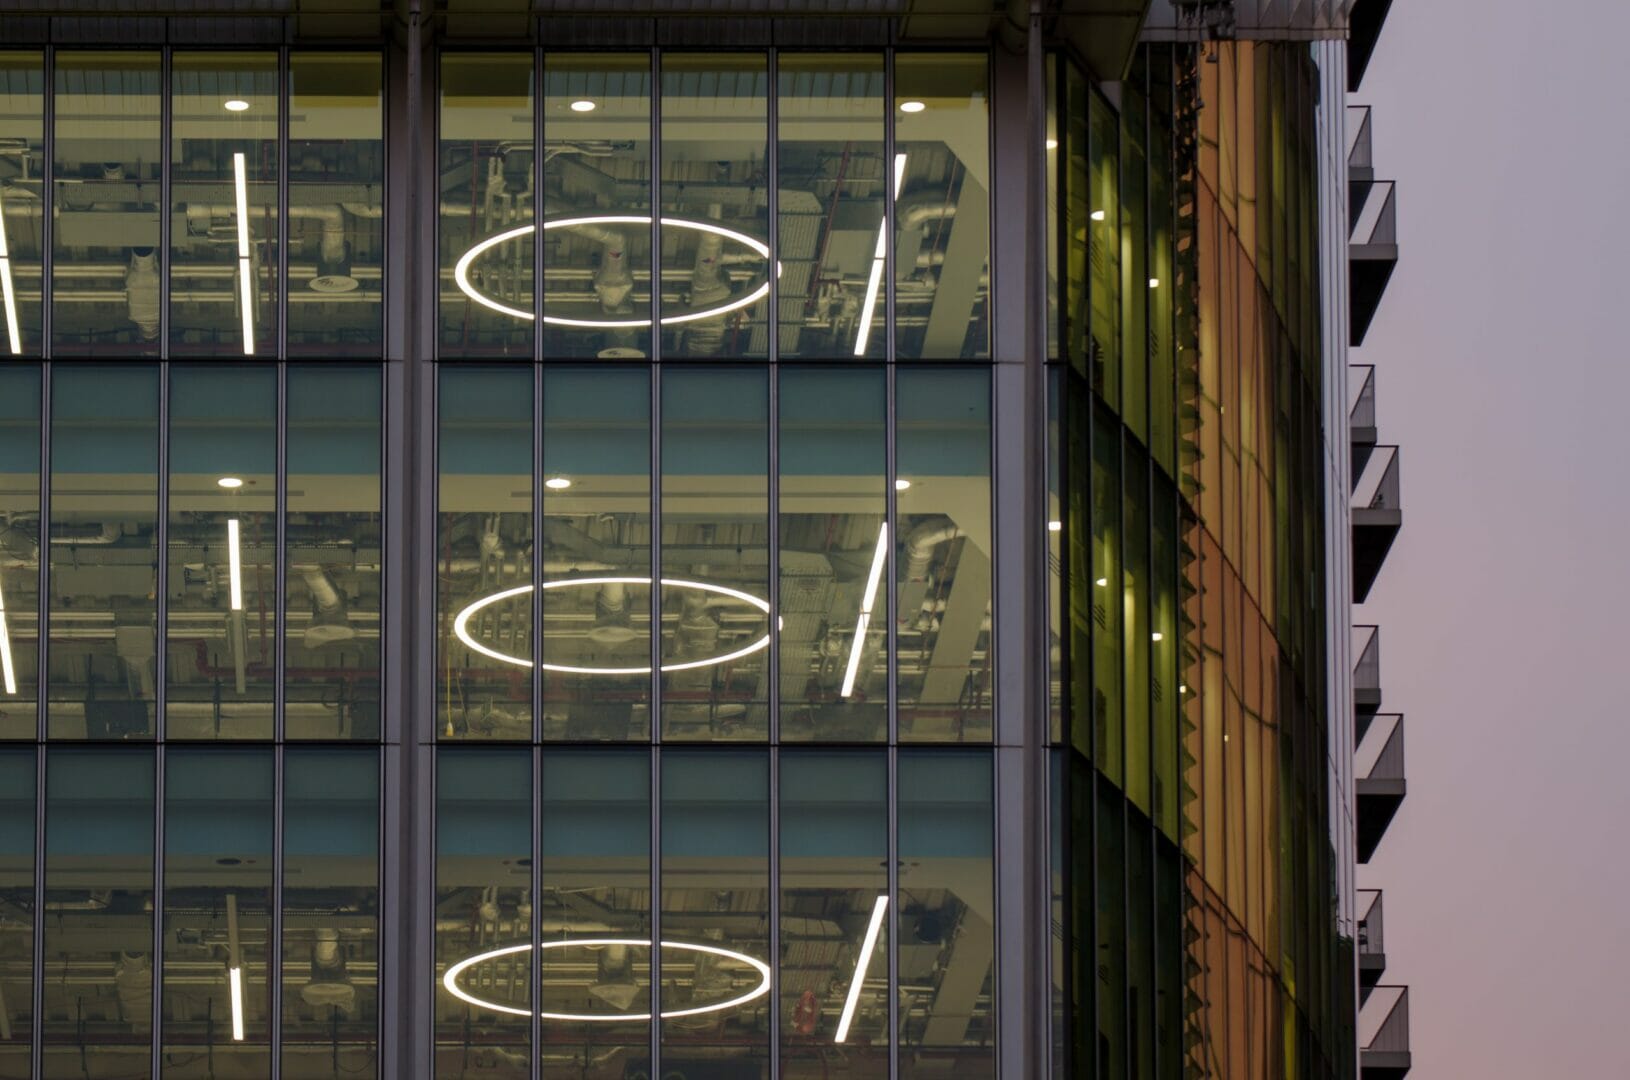 FUTURE Designs supplies lighting for the iconic Citypoint building in the City of London. @FUTUREdesigns